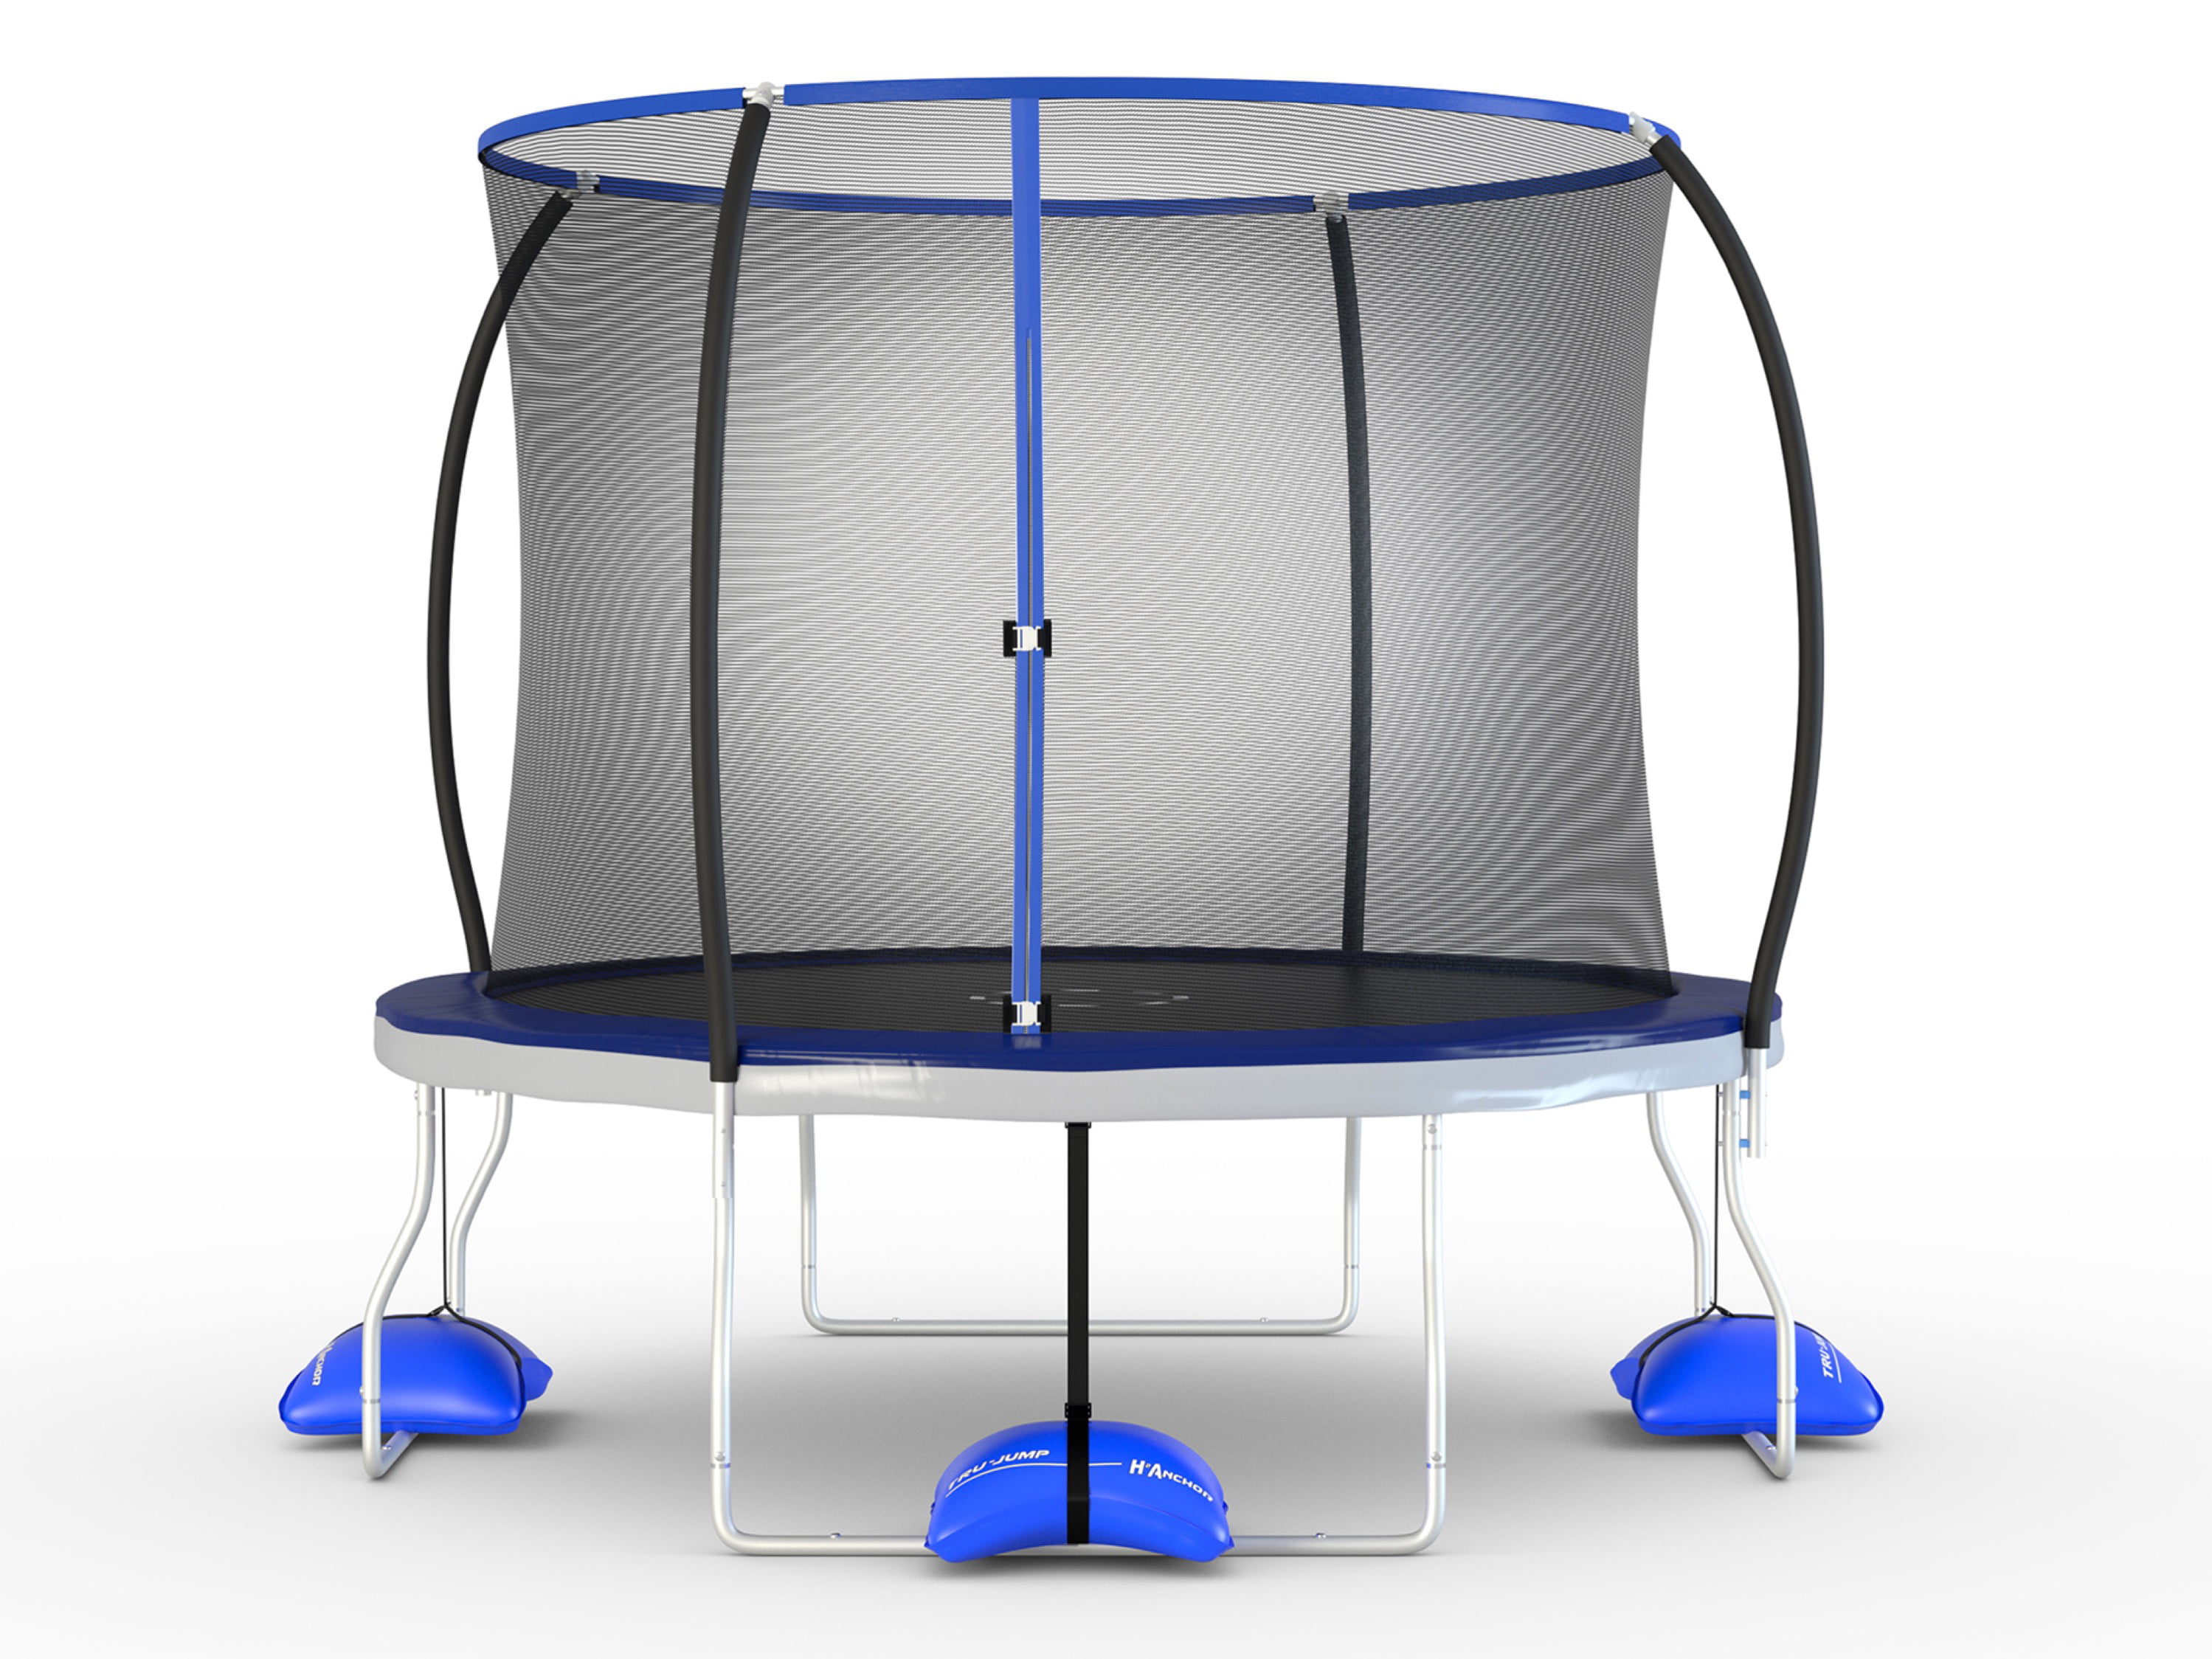 Trujump 10ft Round Trampoline and Tru-Steel Enclosure Combo with Water ...